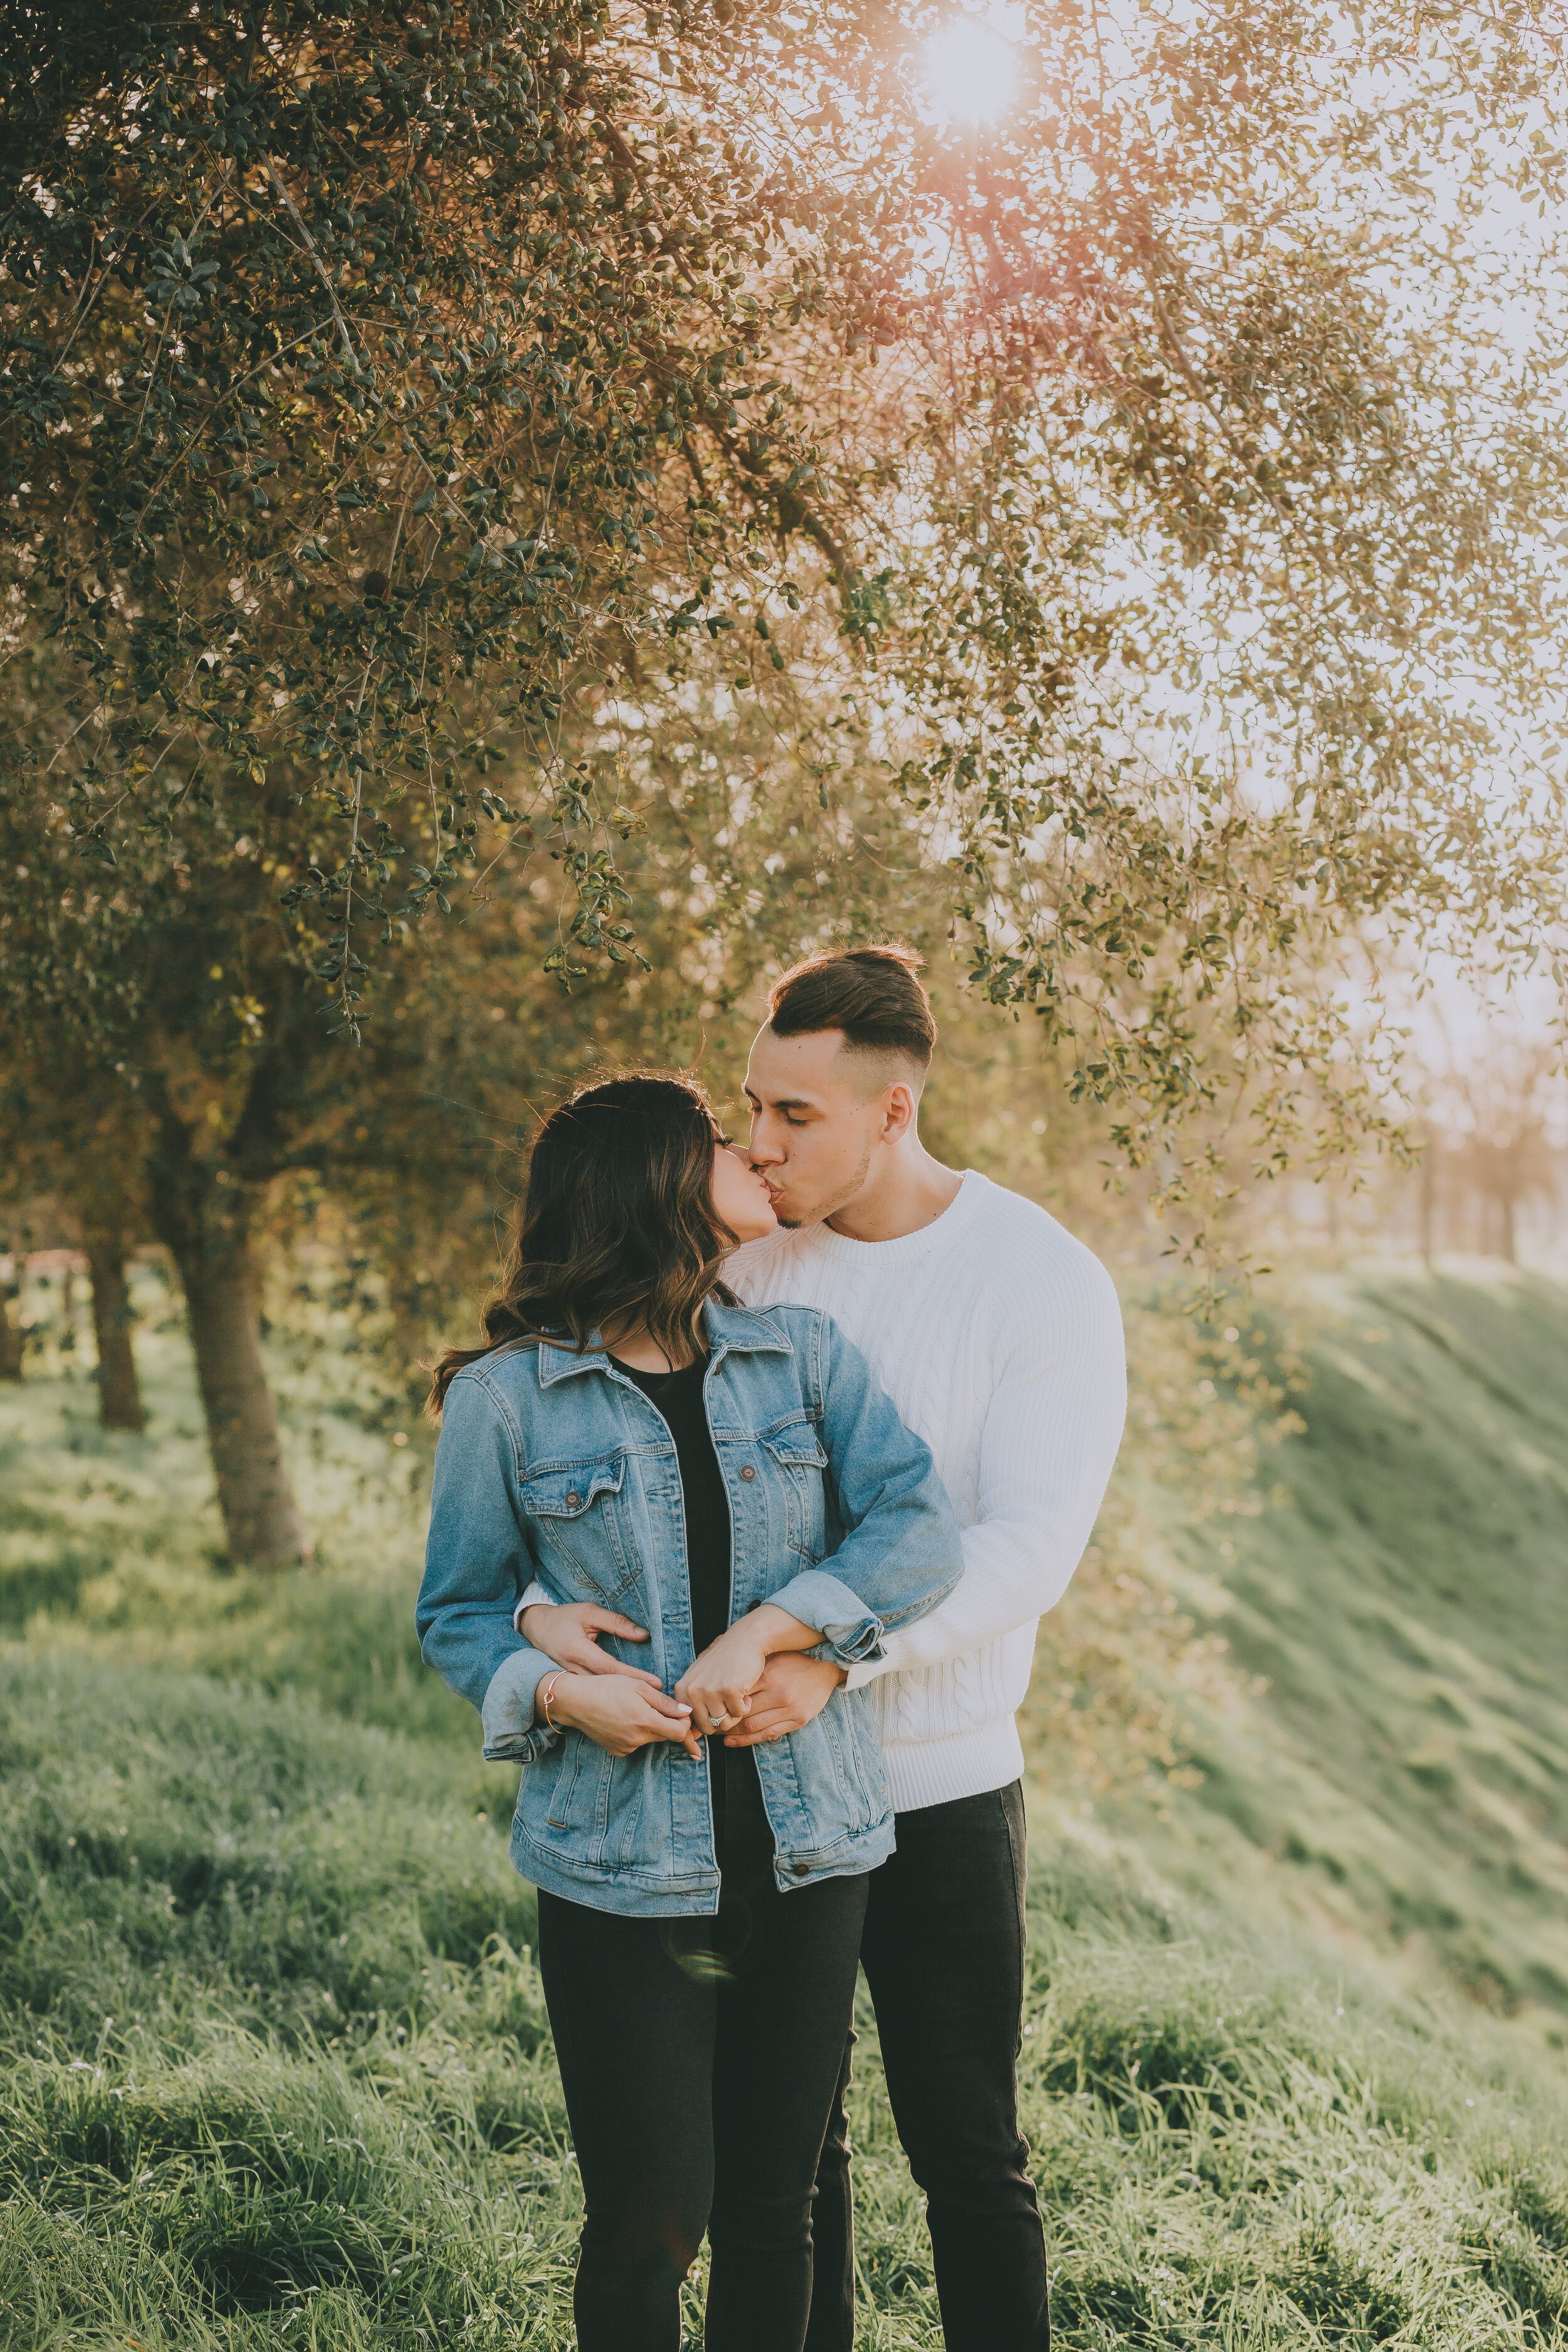 Fresno Engagament Photos - The Clausen Gallery - Samantha and Jesus-8.jpg